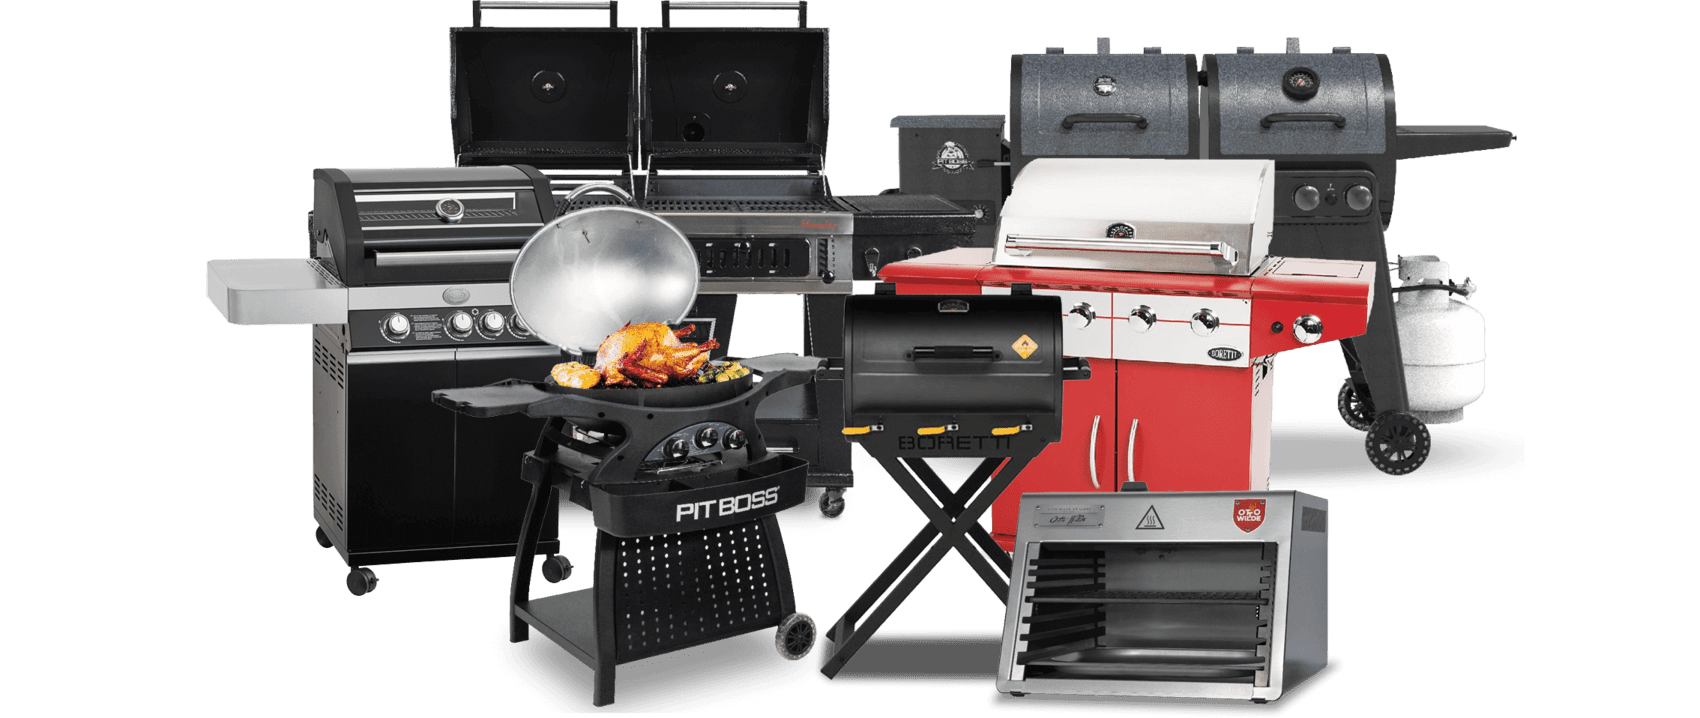 gas-grills-group_-2-lr-1